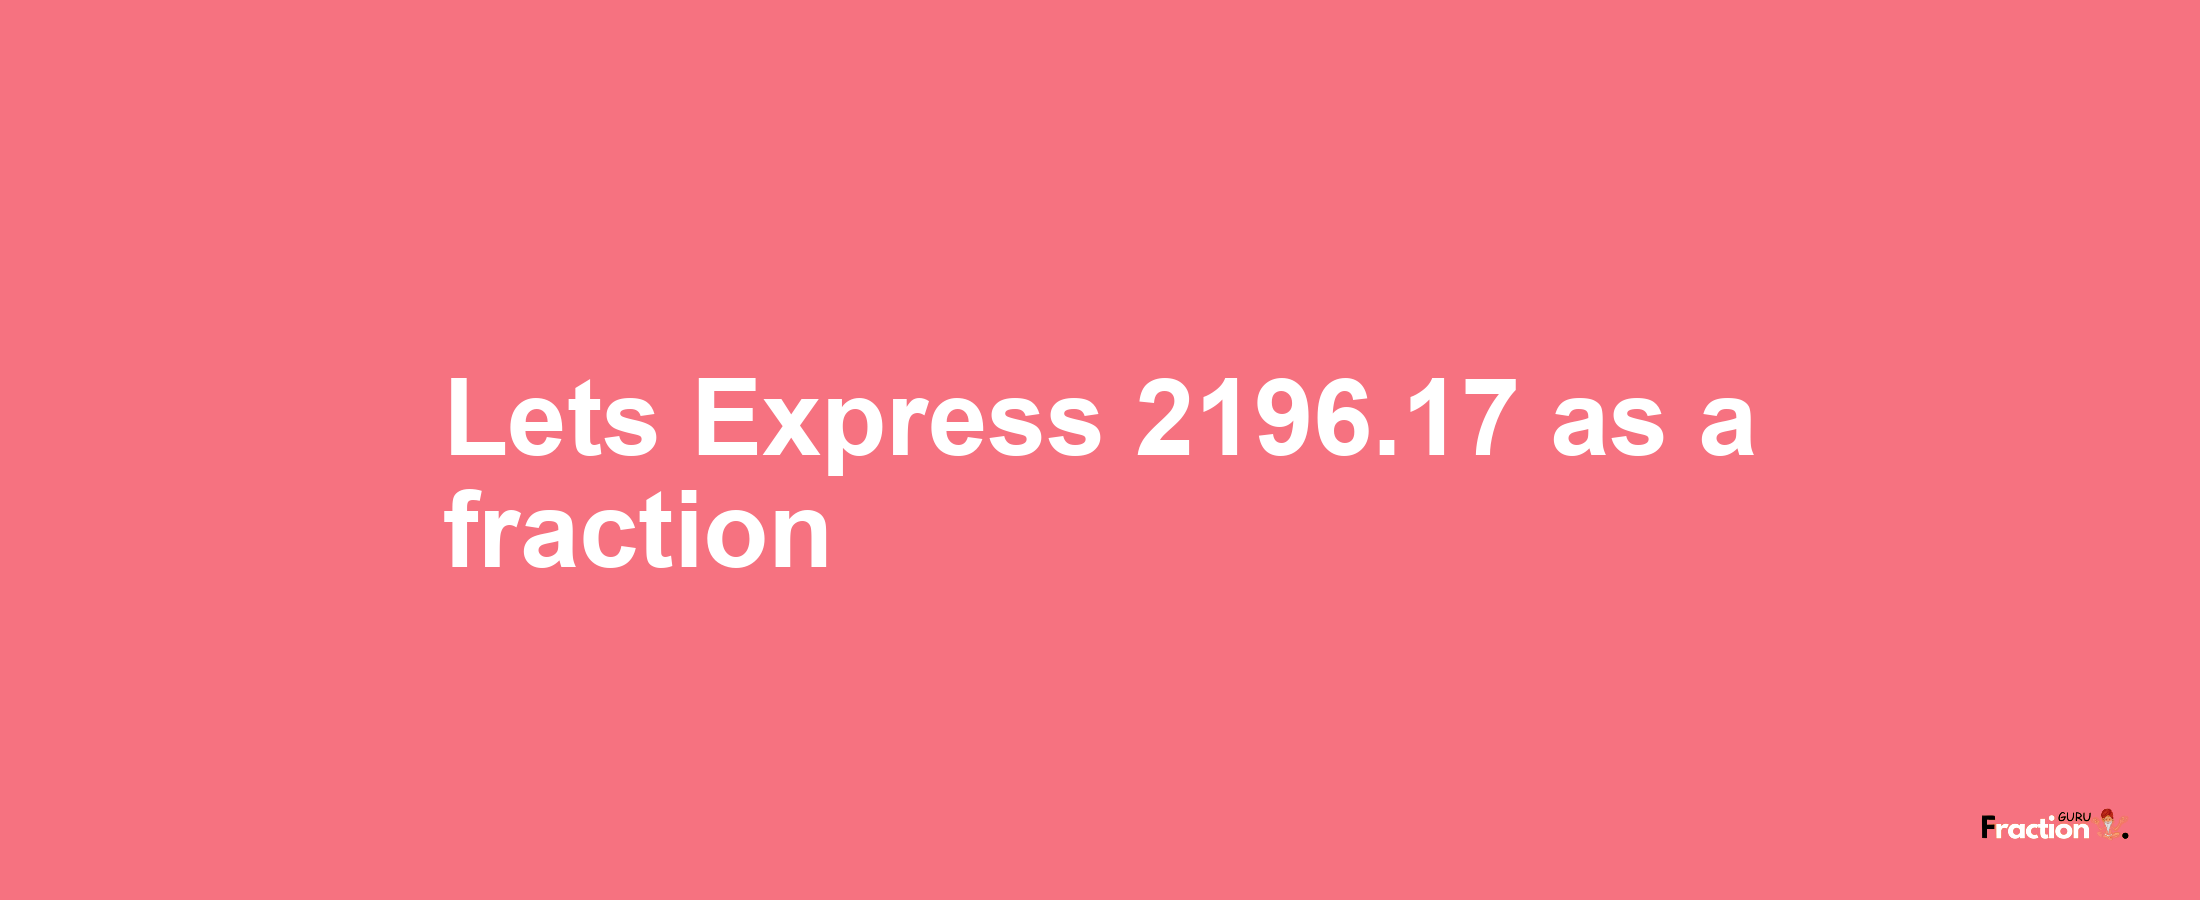 Lets Express 2196.17 as afraction